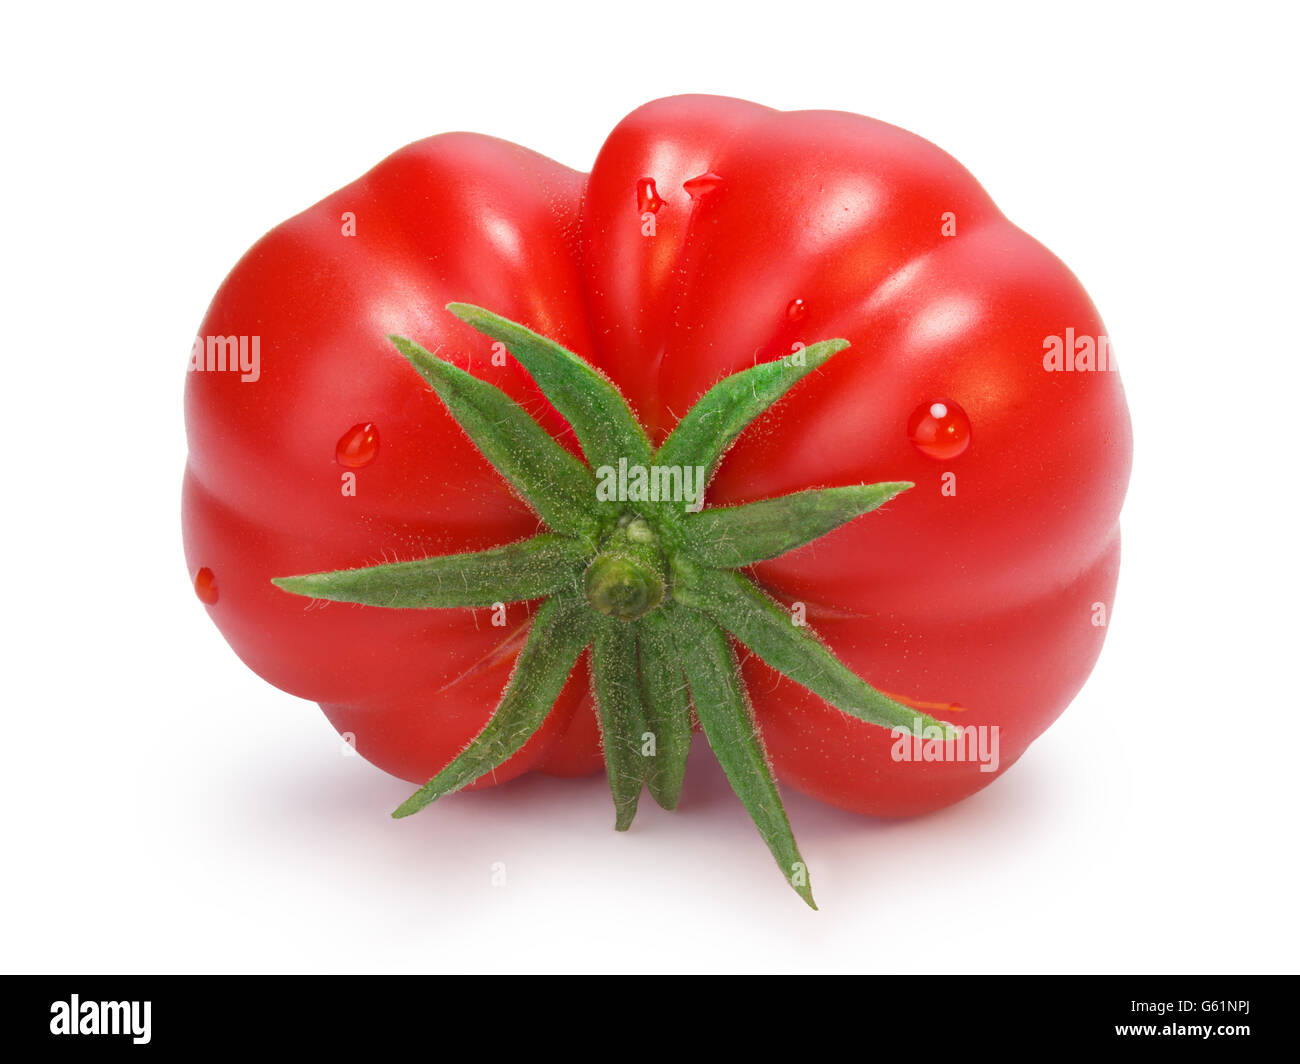 Ripe heirloom Tomato, Togorific variety (Solanum lycopersicum). Clipping paths for both tomato and shadow, infinite depth of fie Stock Photo